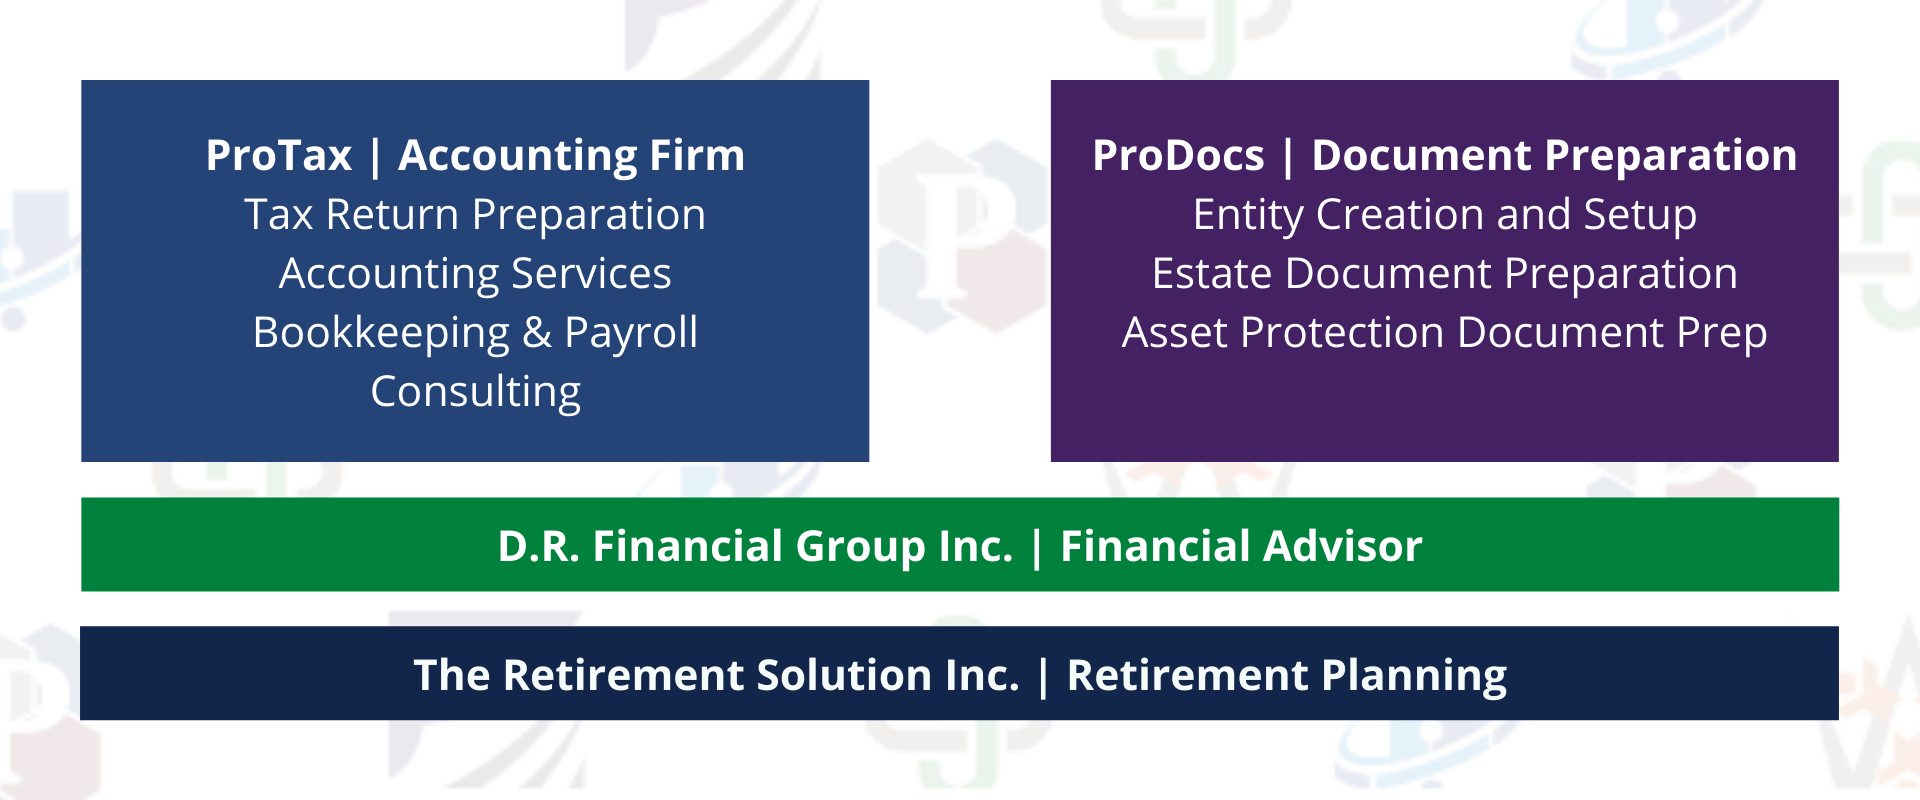 ProTax accounting firm and prodocs